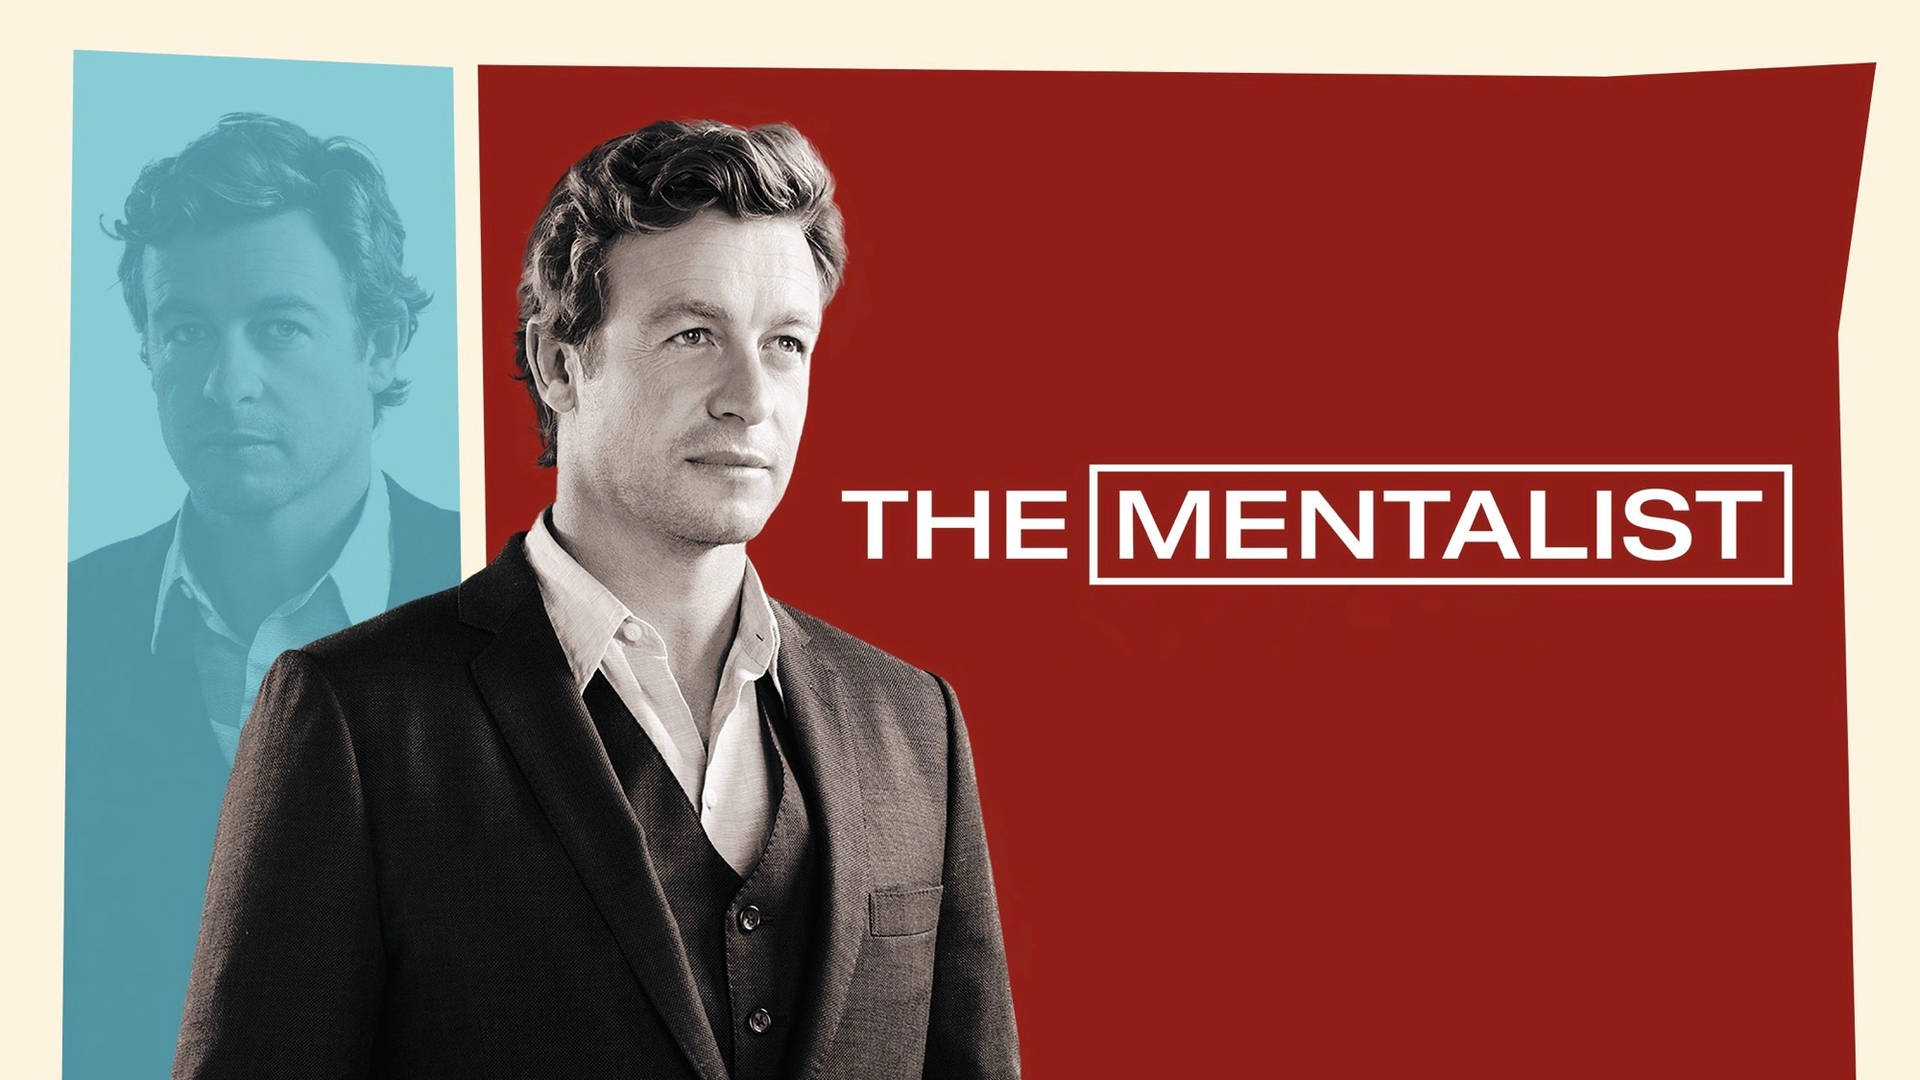 Patrick Jane - The Intriguing Protagonist of The Mentalist Wallpaper